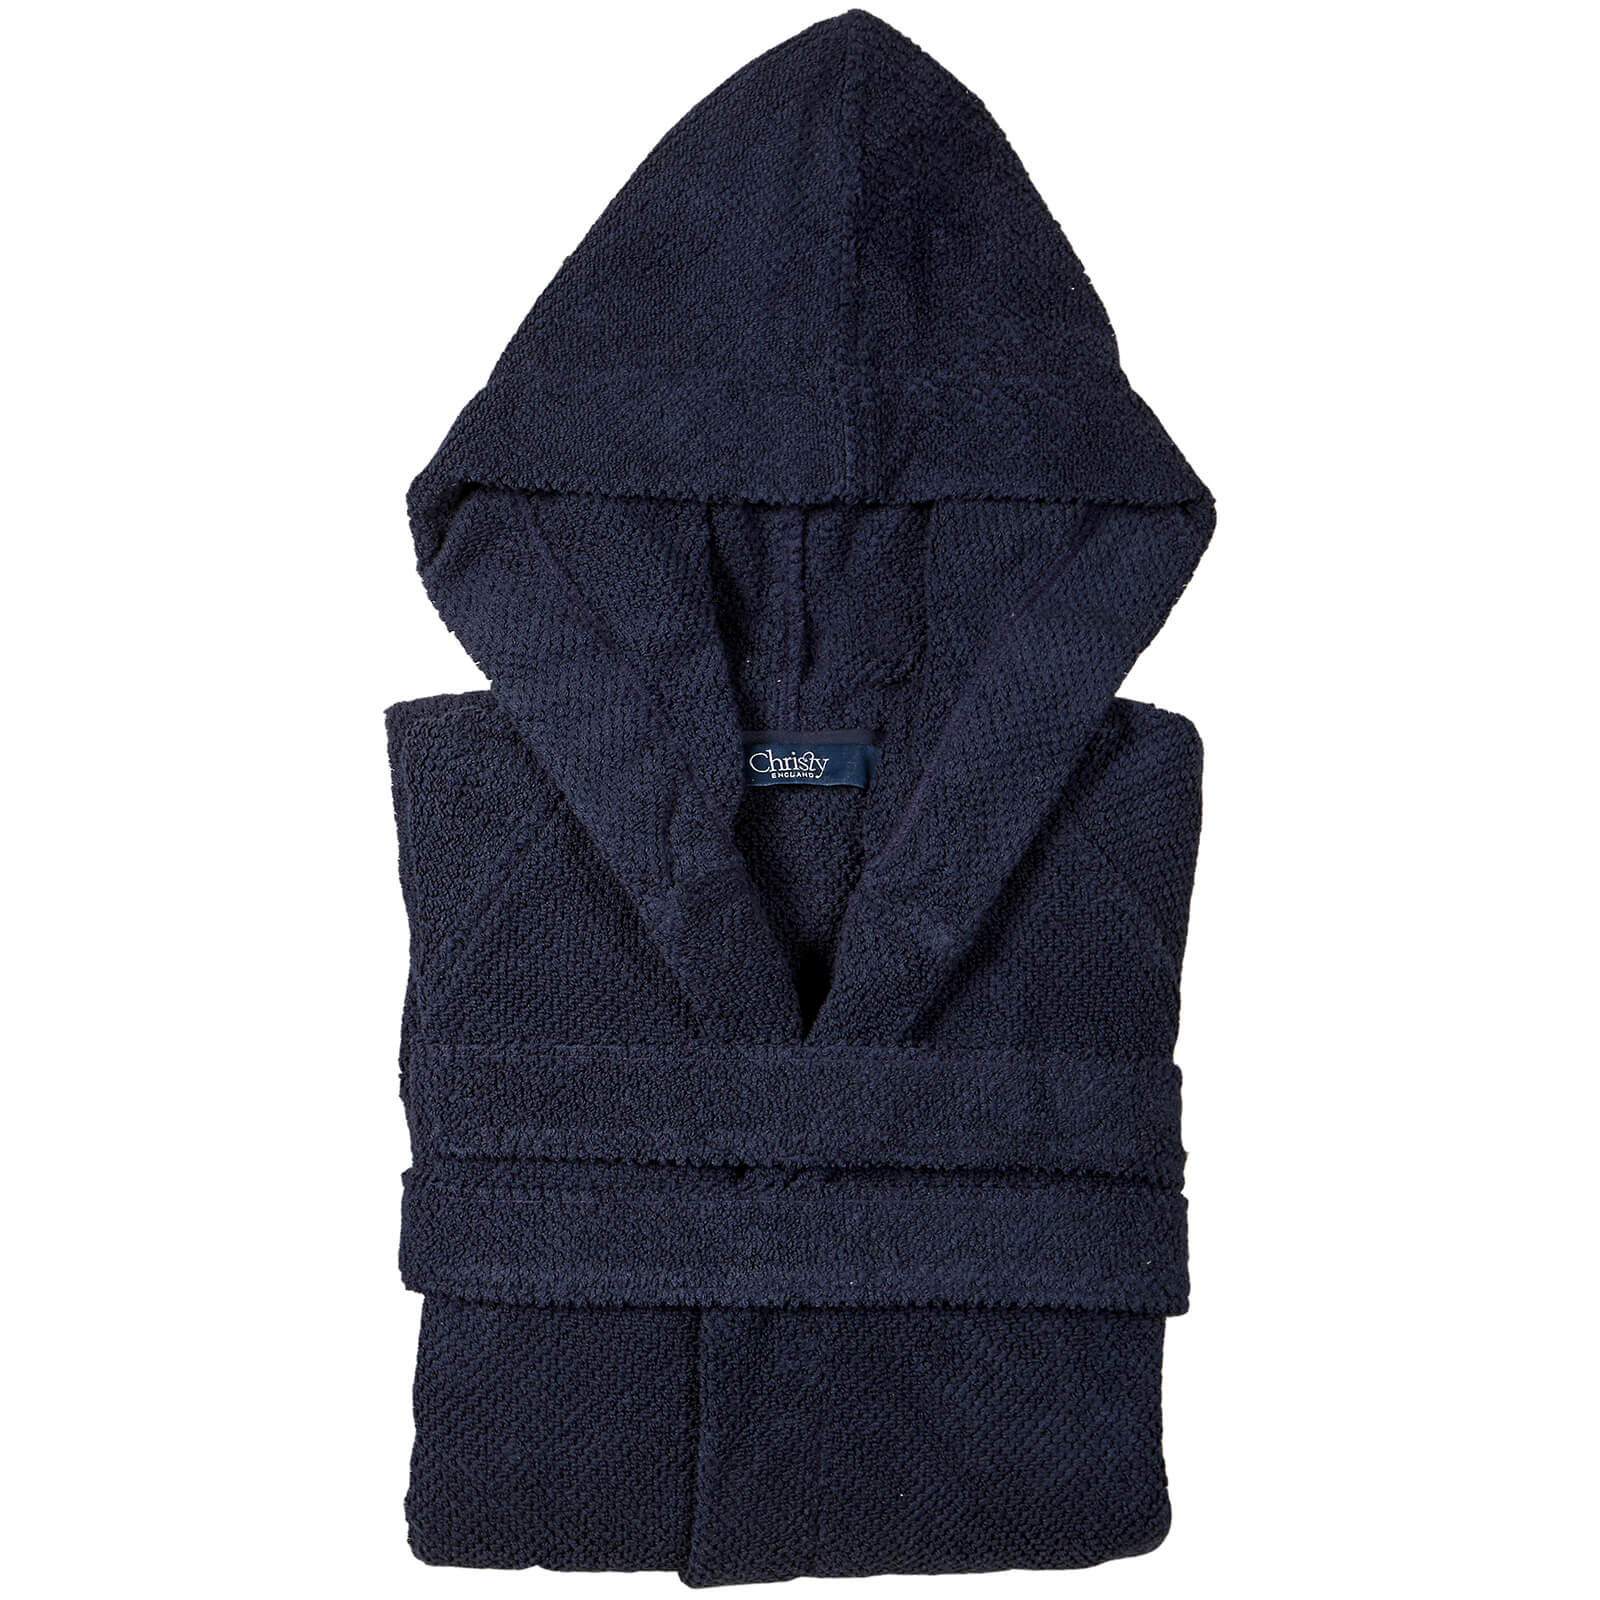 Image of Christy Brixton Dressing Gown - Midnight - S